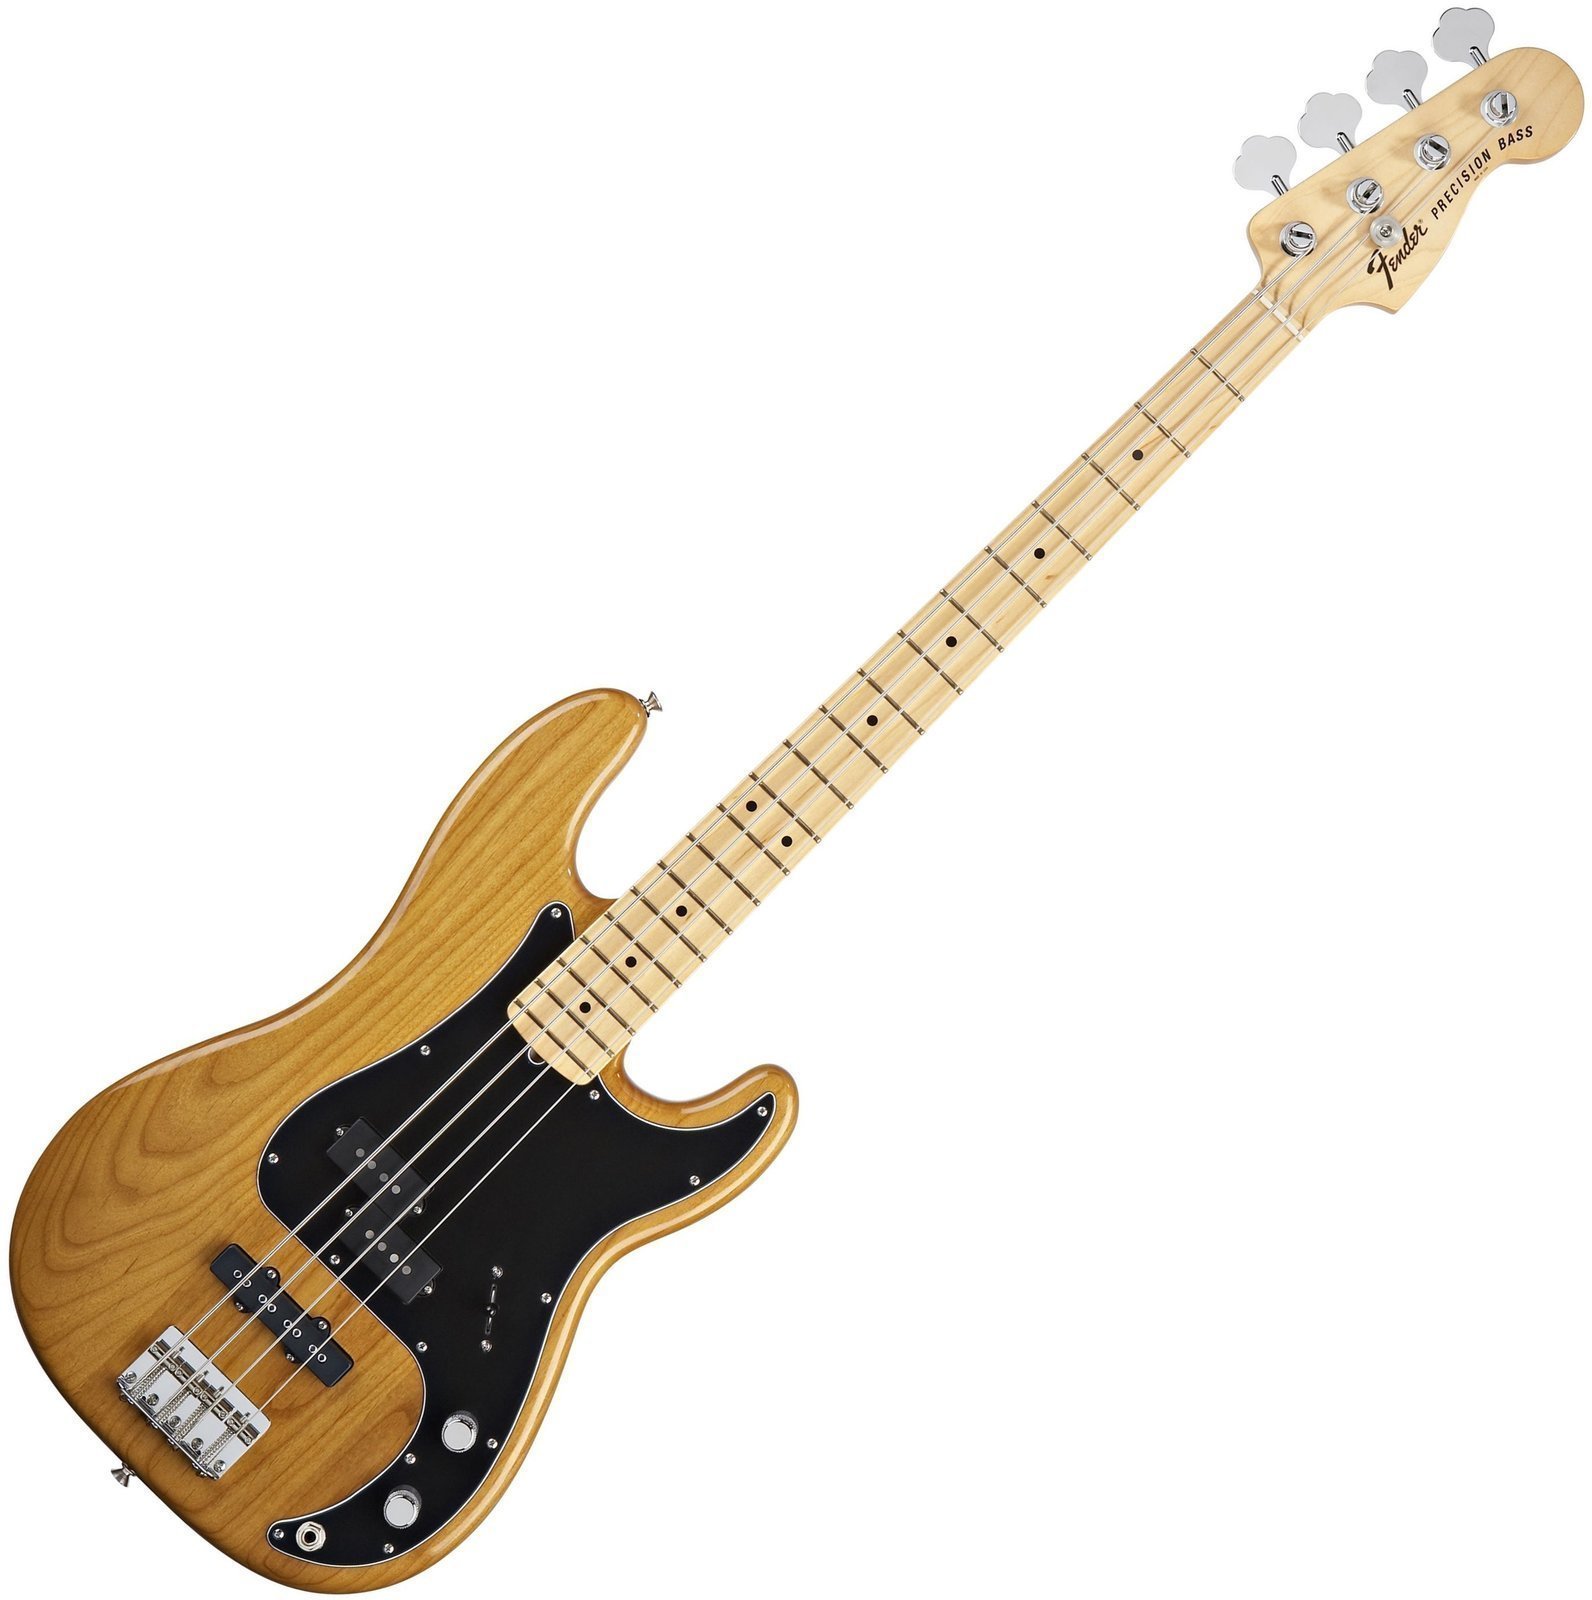 E-Bass Fender Tony Franklin Fretted Precision Bass Maple Fingerboard, Gold Amber